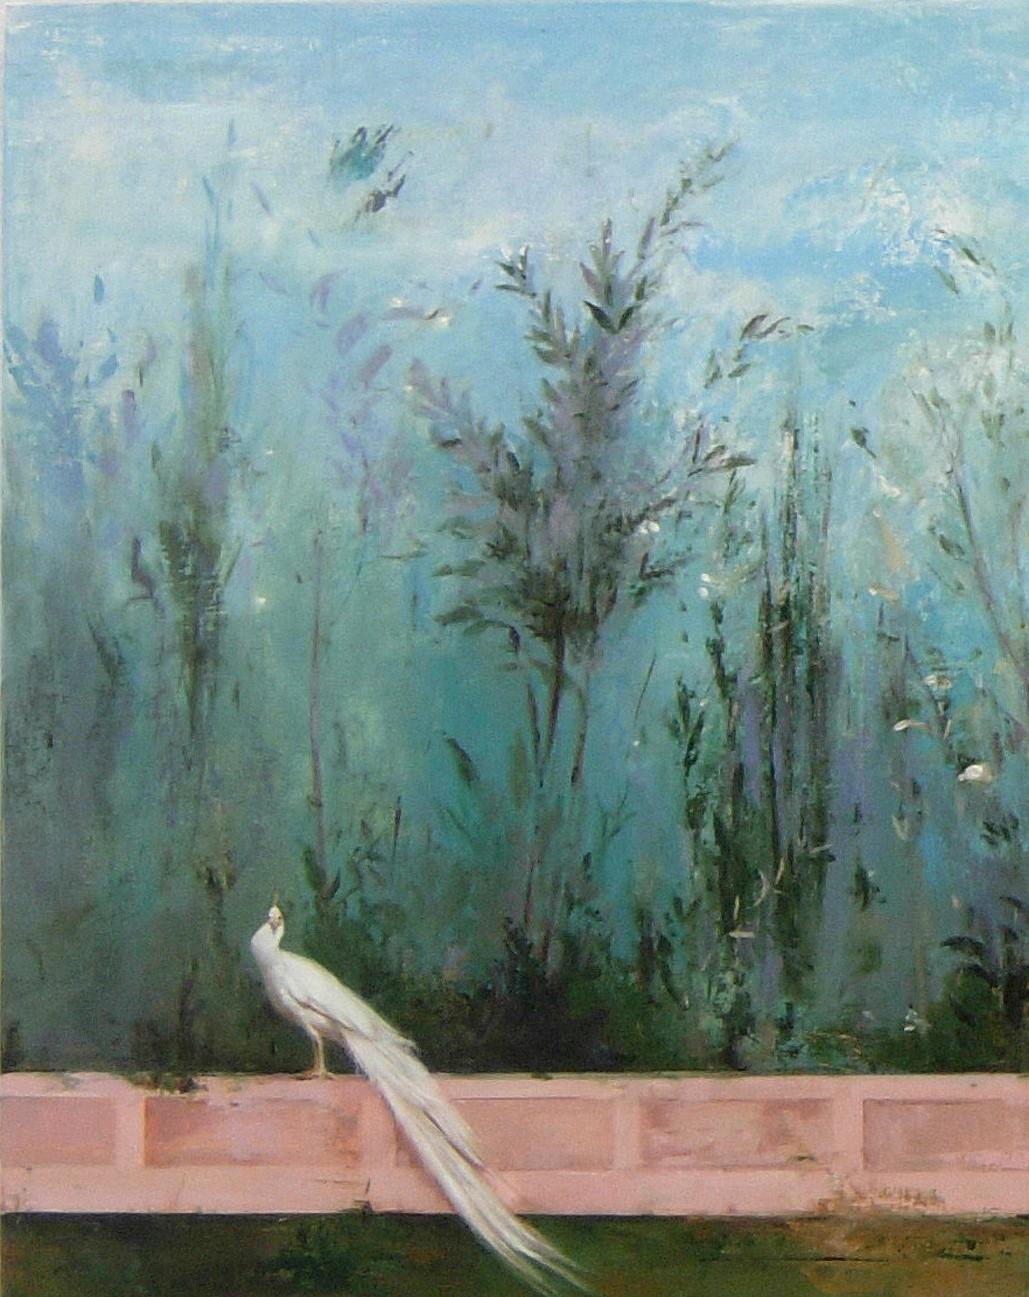 Il Muro, Large Scale Gardenscape Inspired by Ancient Roman Frescos, Oil on Panel - Painting by Carol Pylant